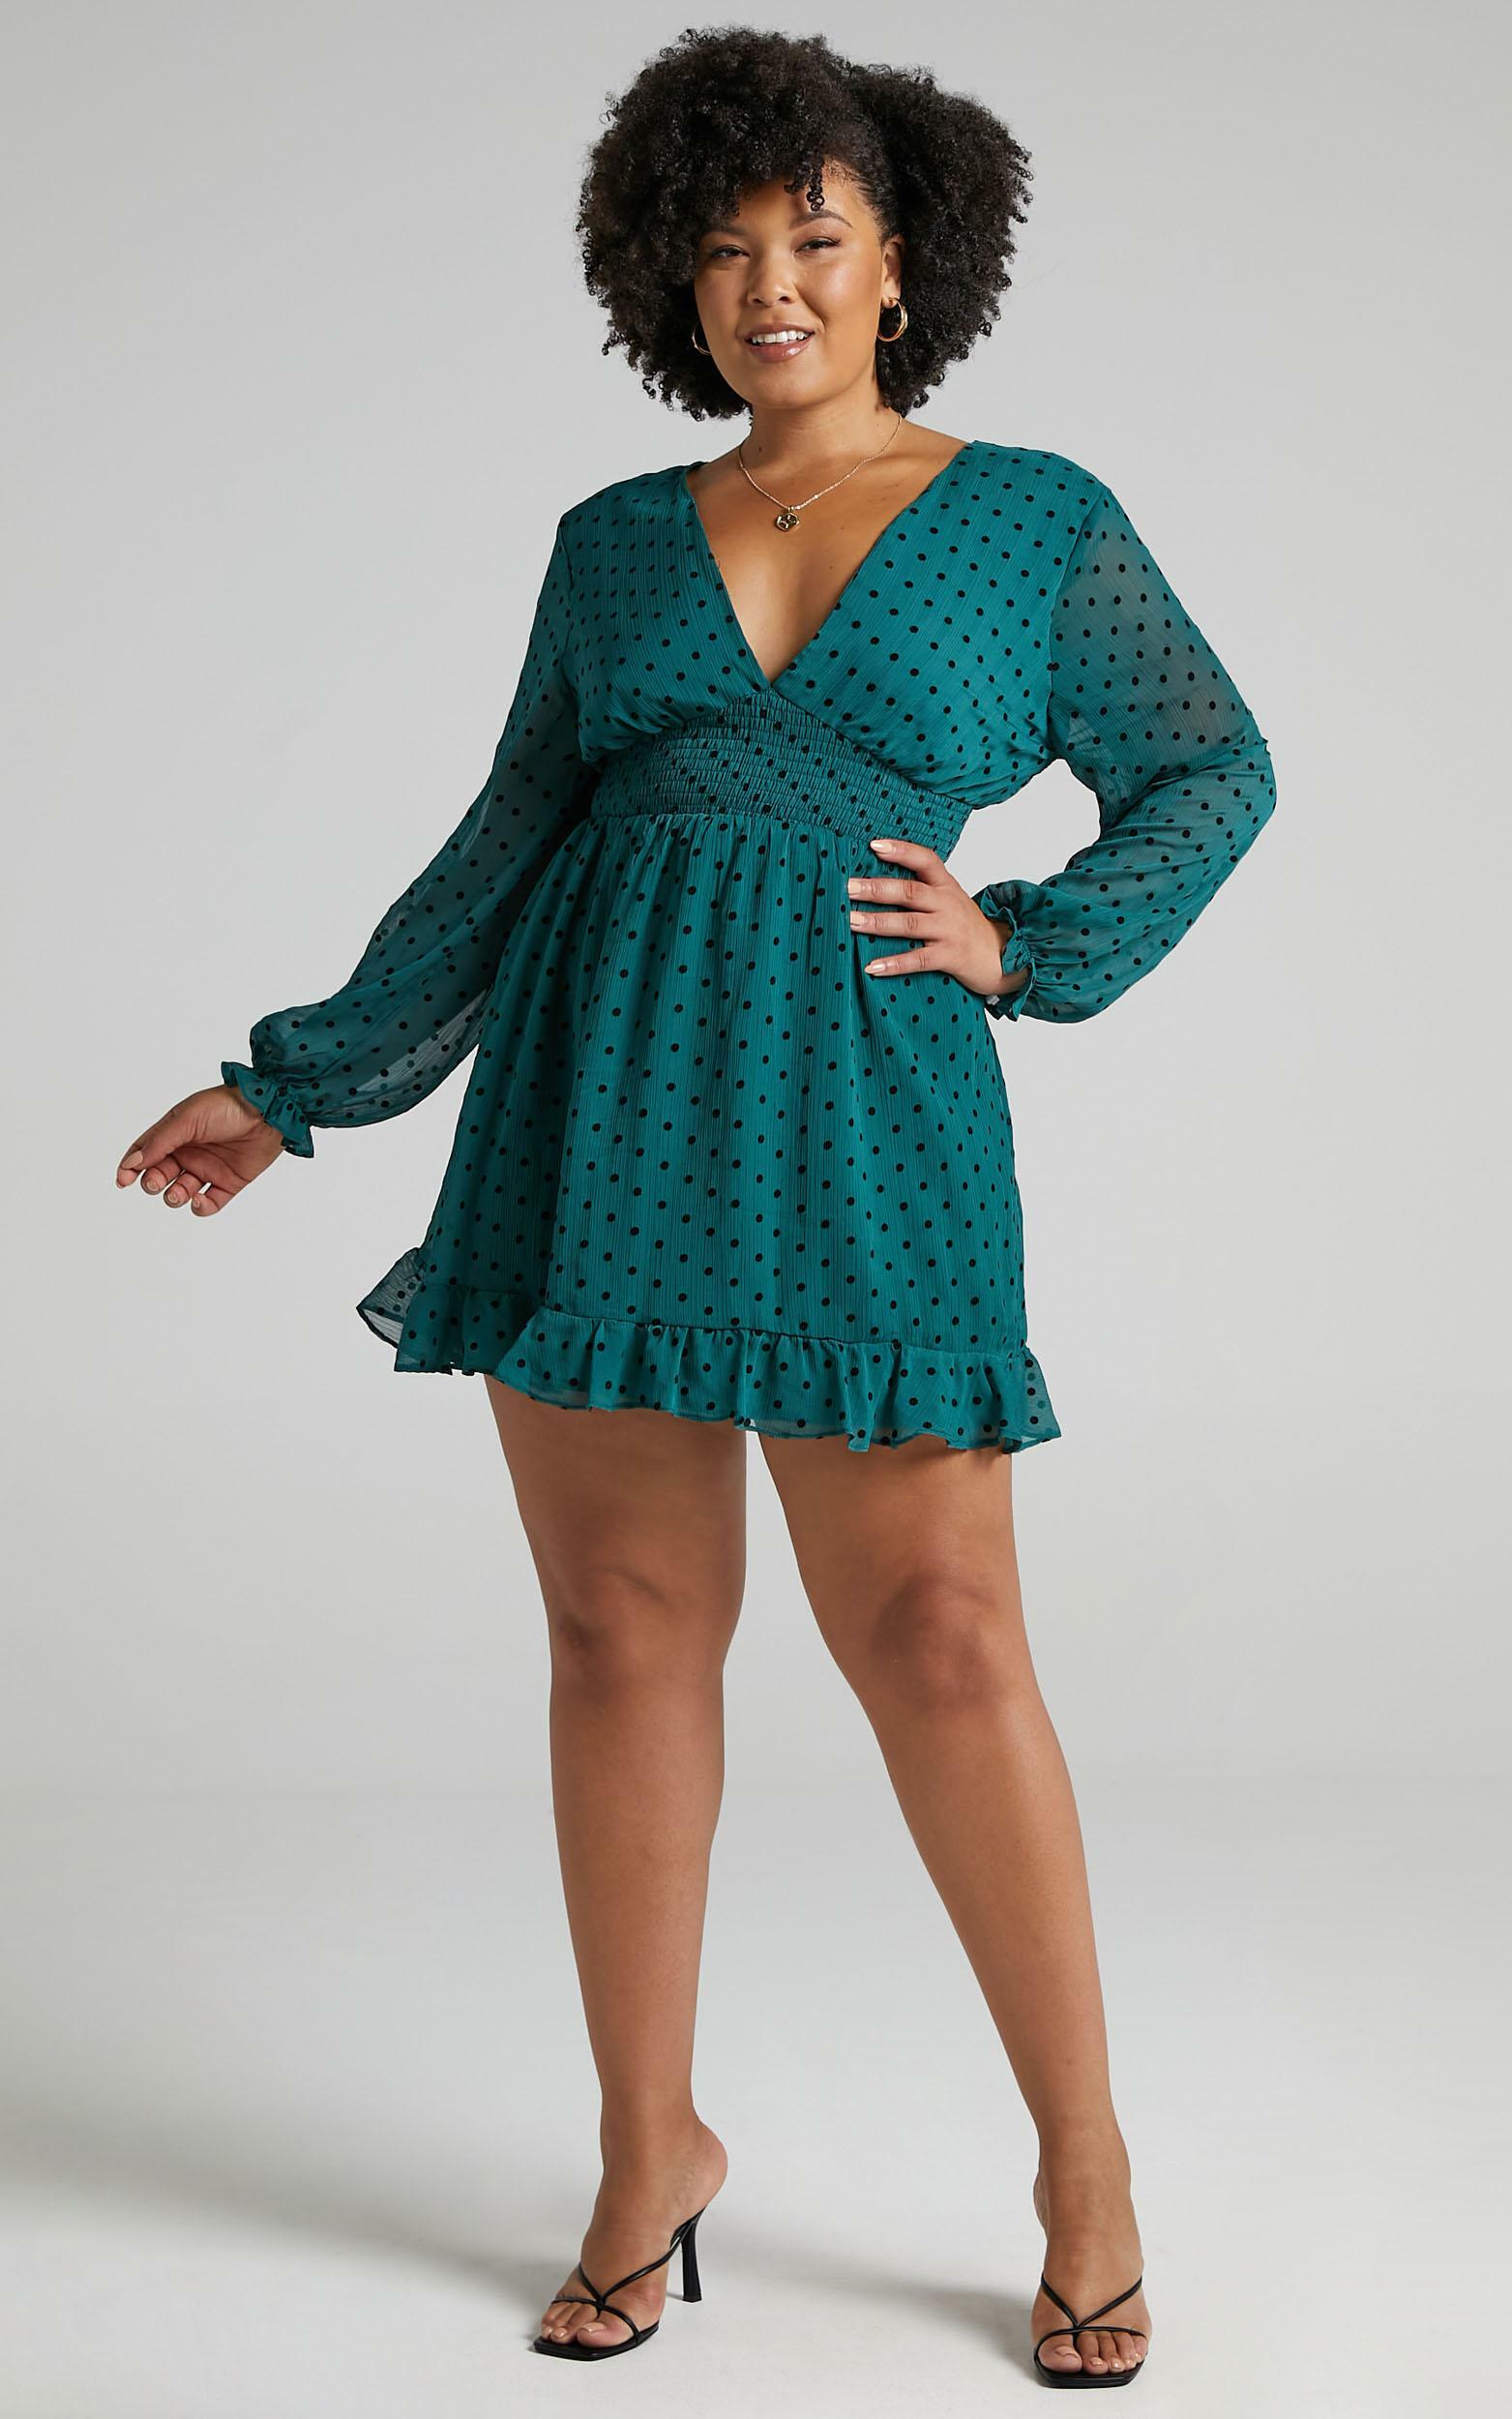 Pretty As You Long Sleeve Mini Dress in Emerald Spot - 04, GRN2, hi-res image number null